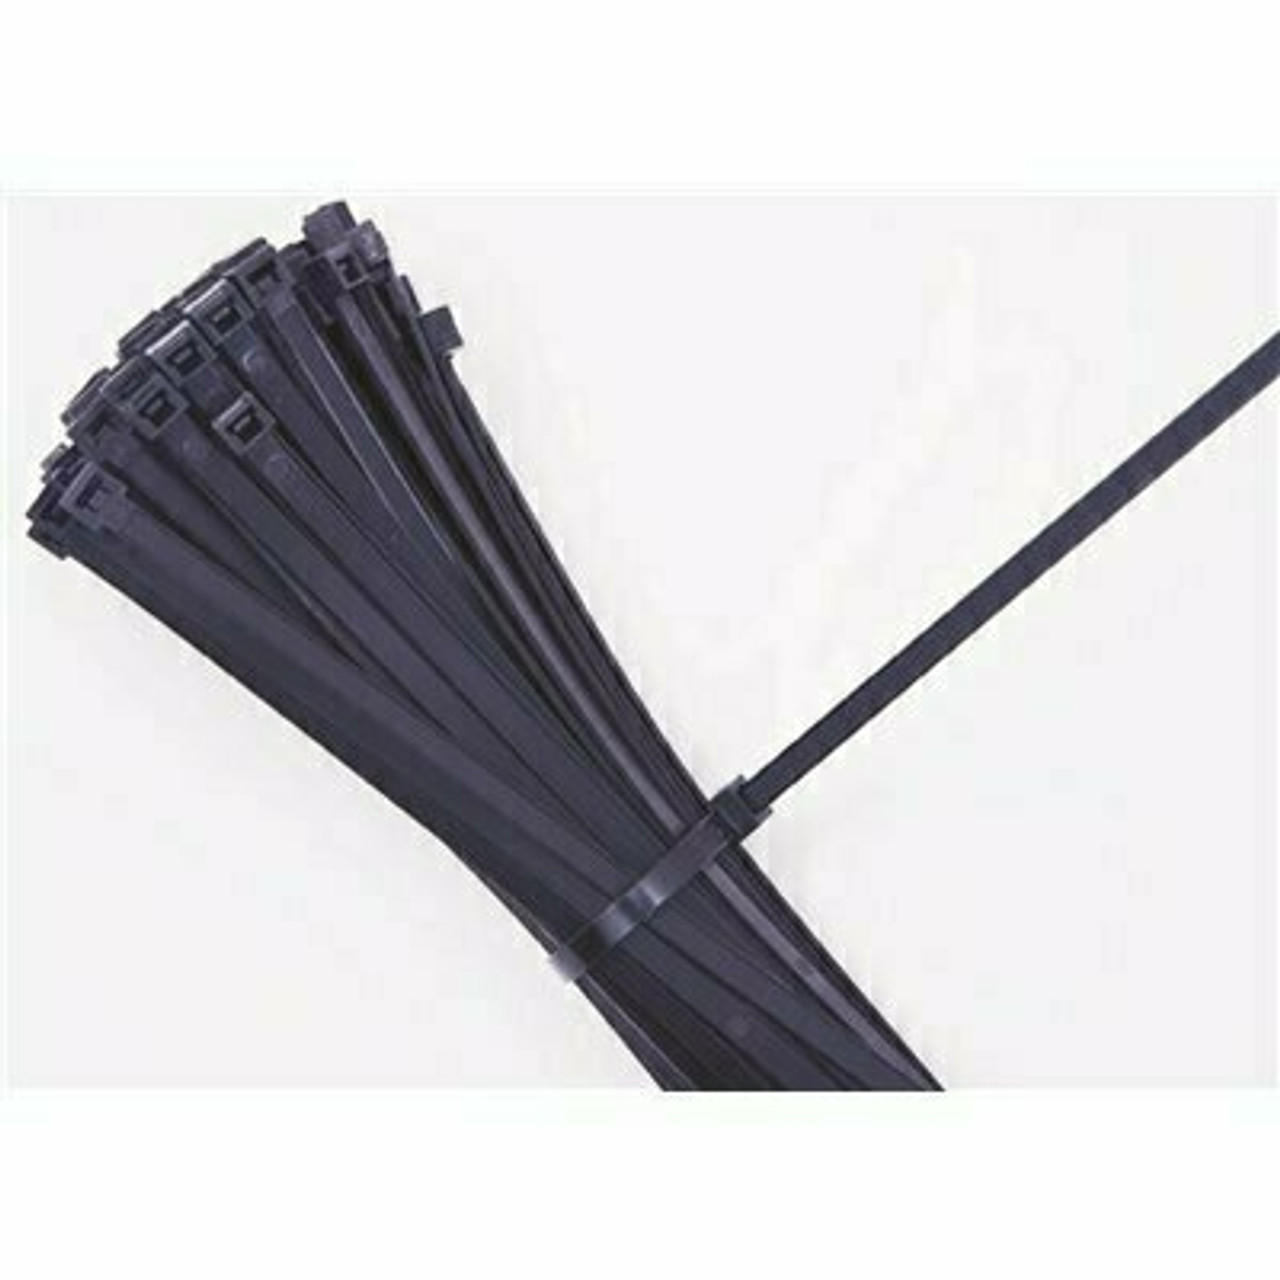 Commercial Electric 8 In. 50Lb Uv Black Cable Tie (100-Pack)